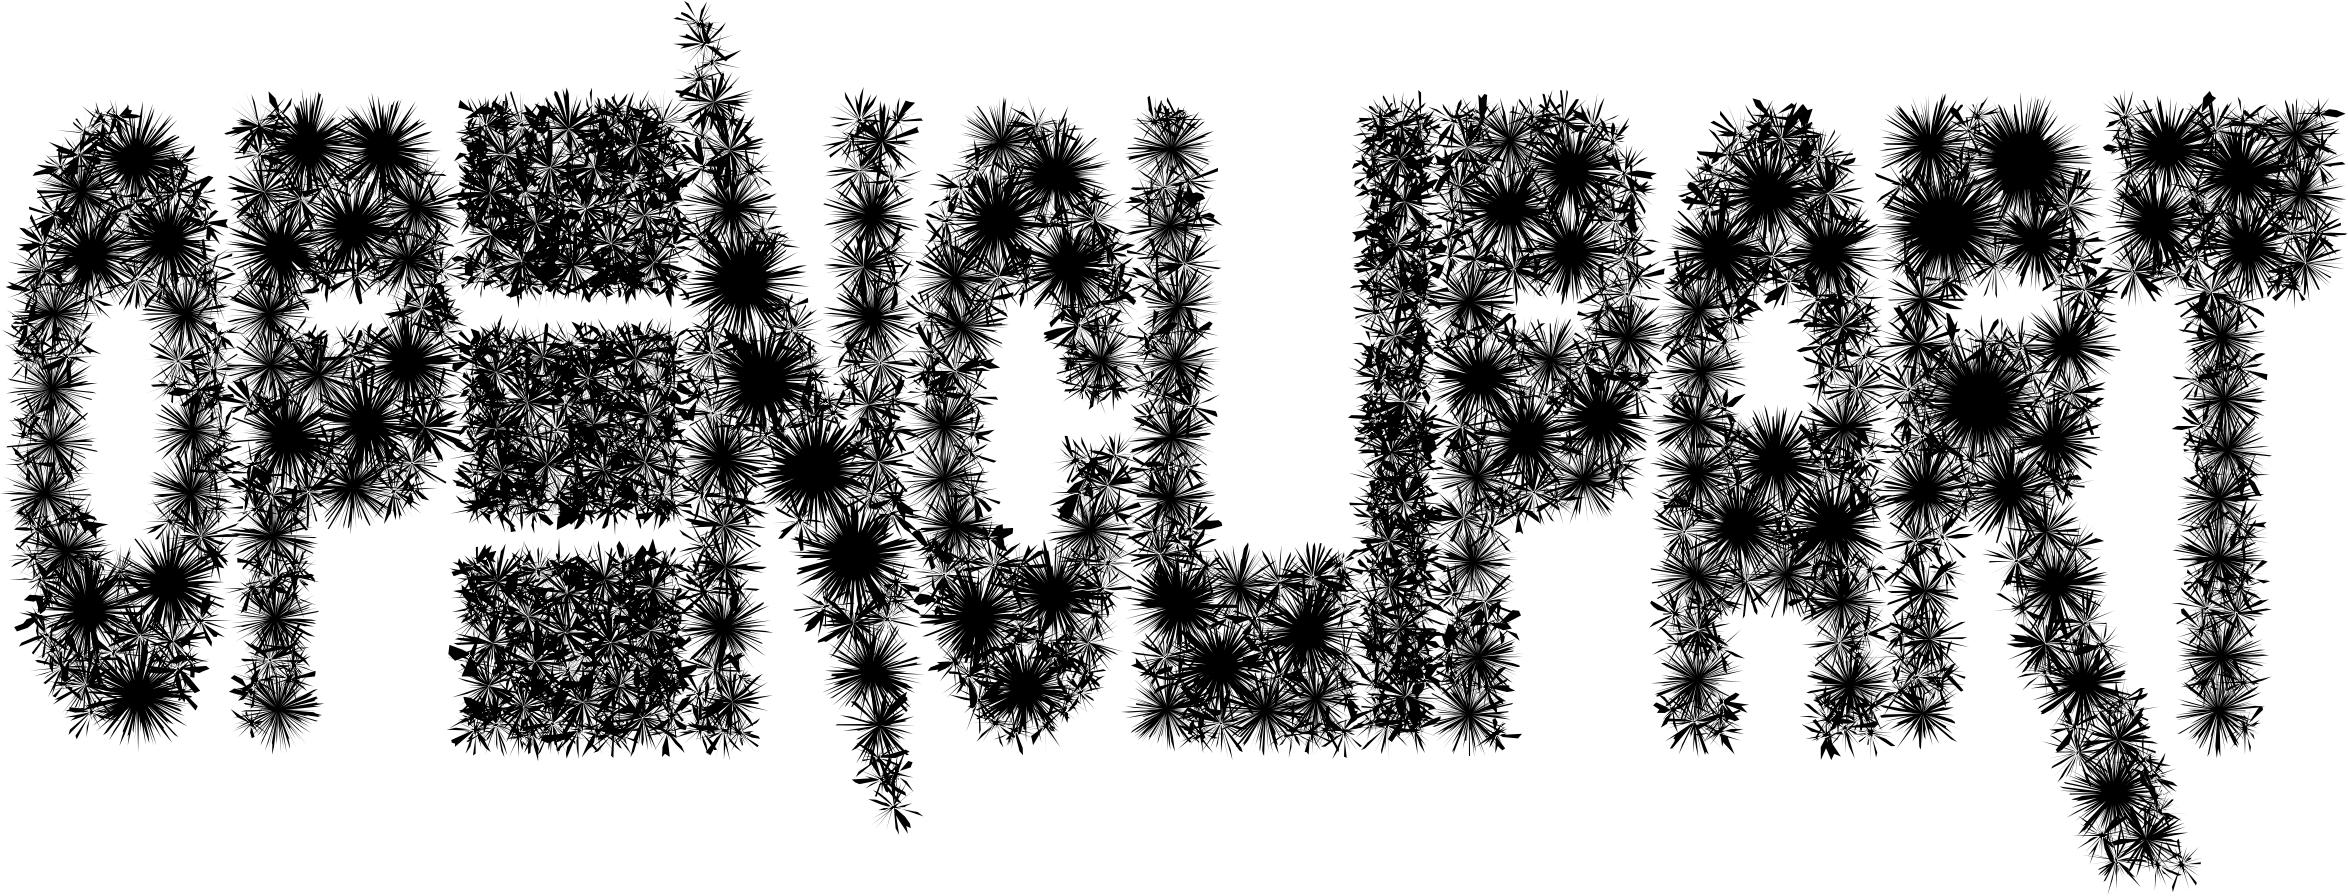 OpenClipart Typography Logo Dandelions png